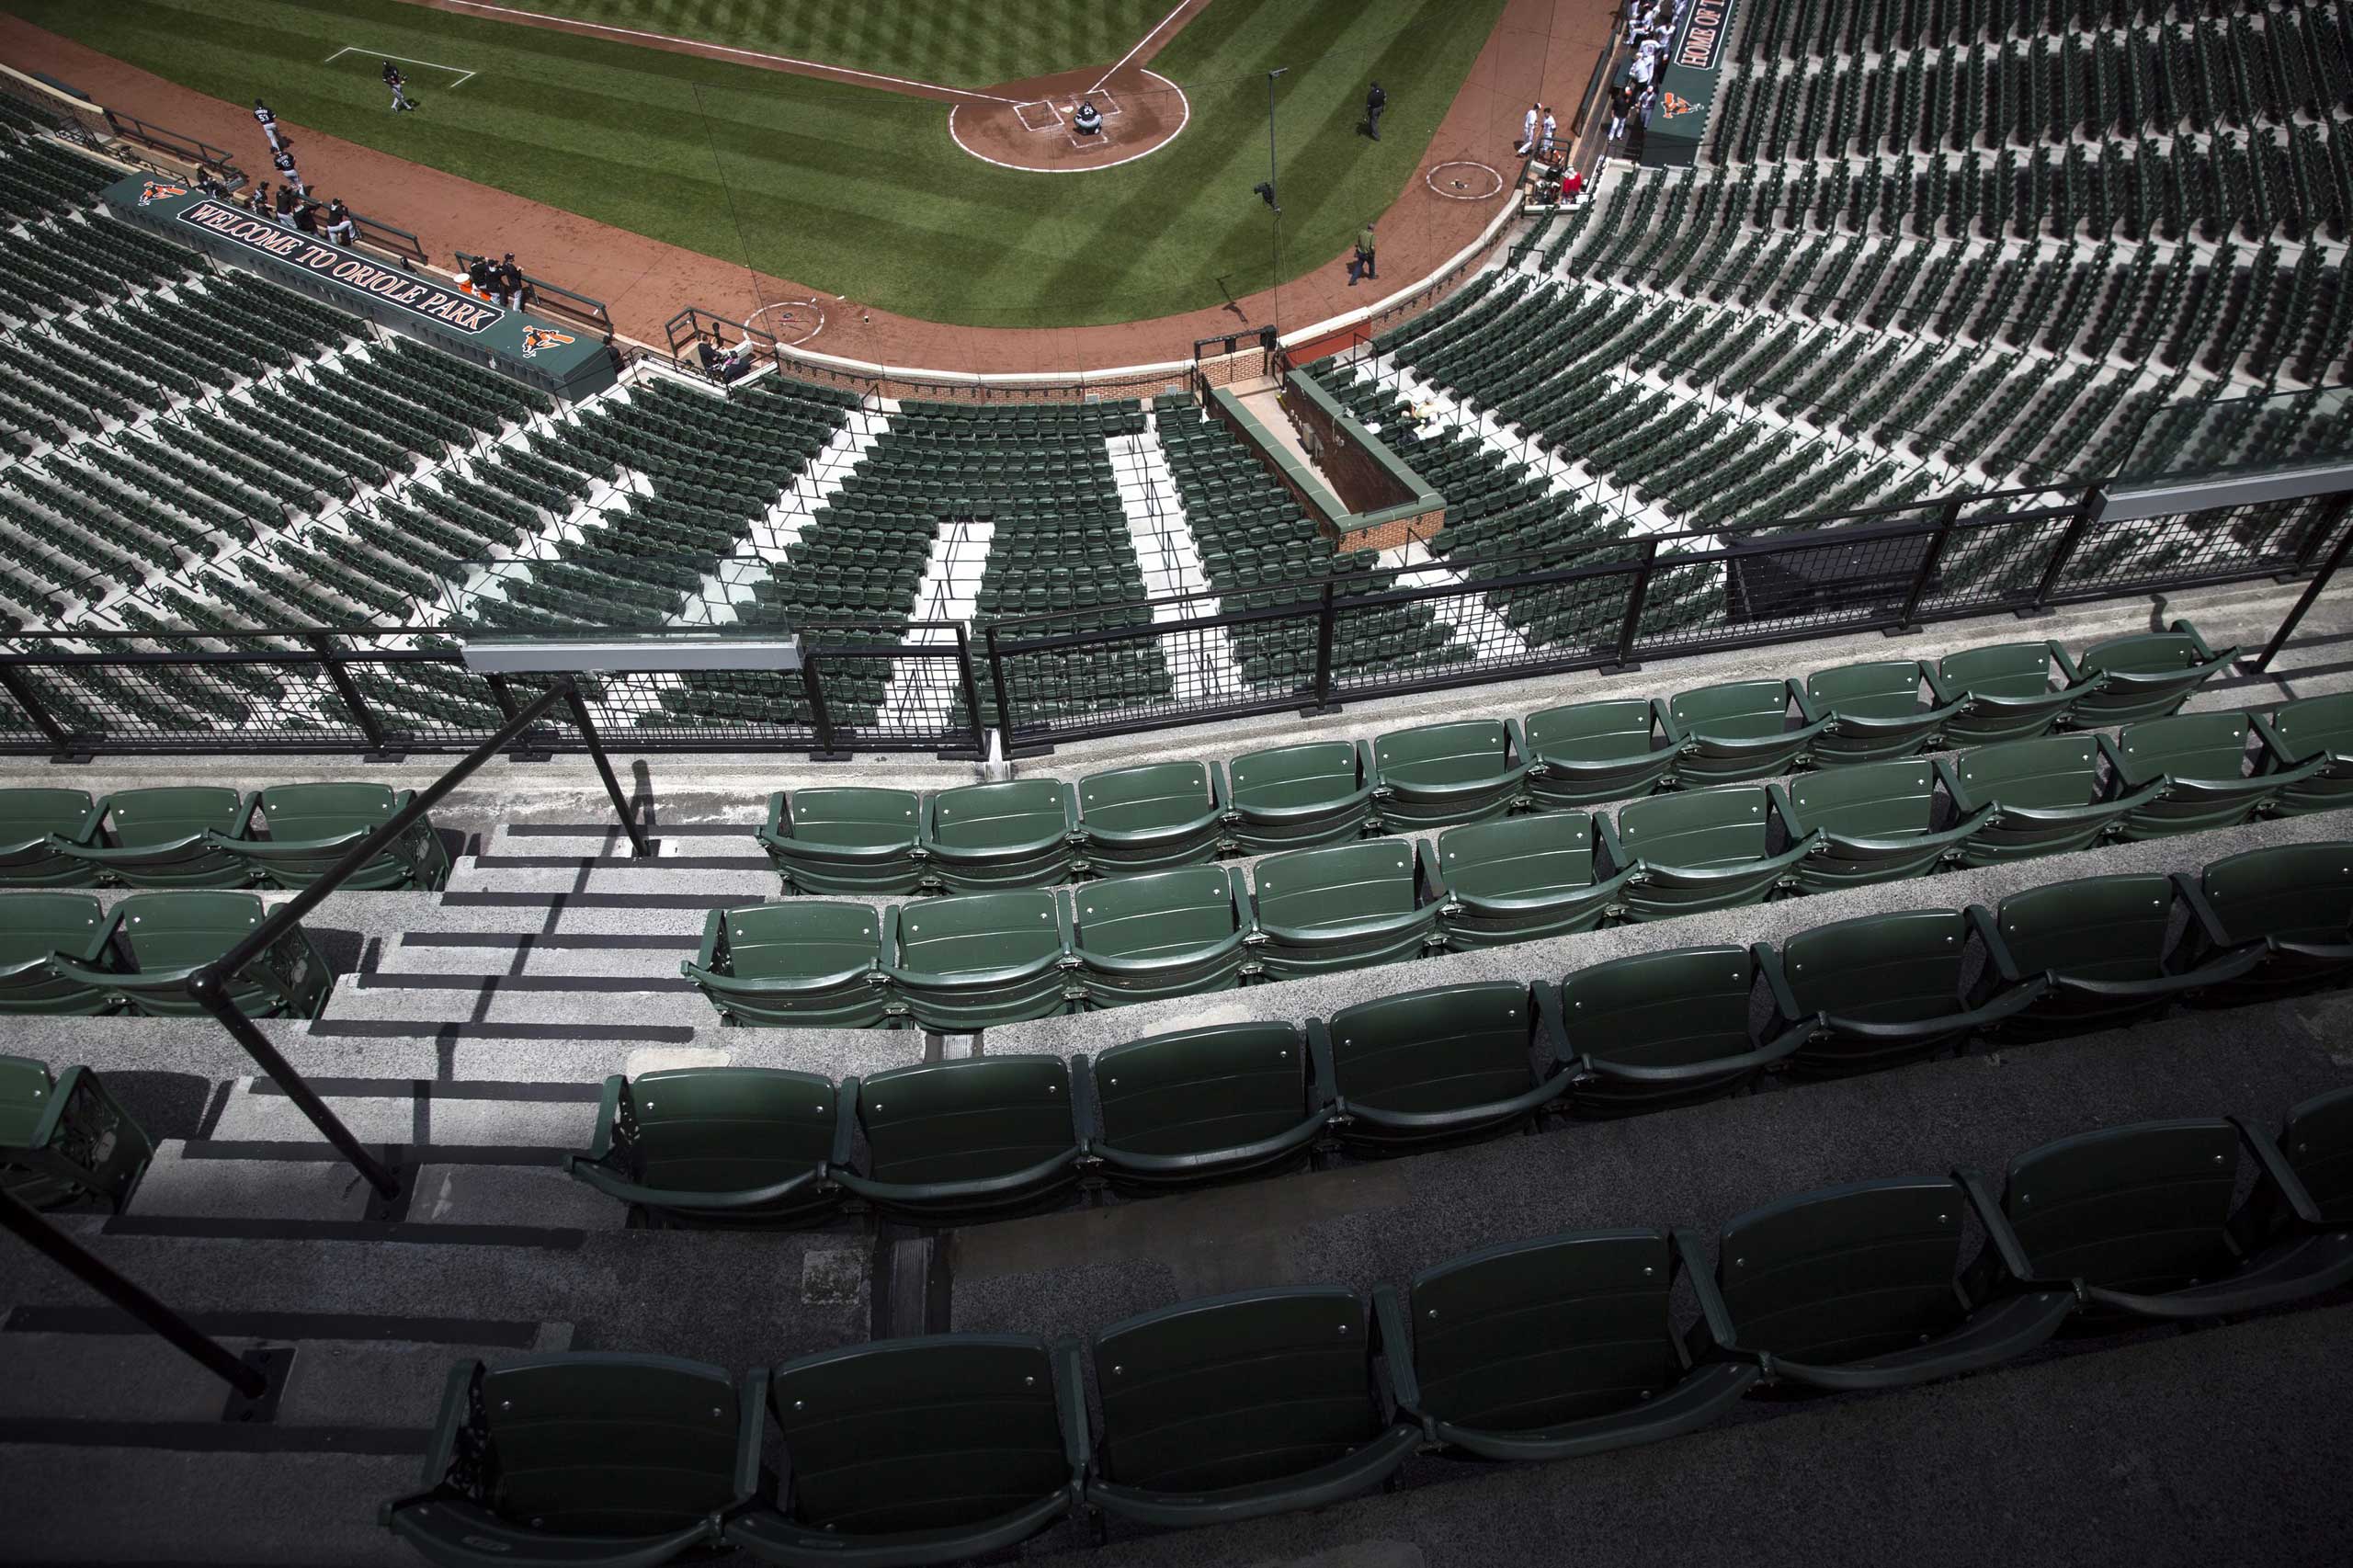 Empty seats as the The Chicago White Sox and Baltimore Orioles play at Oriole Park at Camden Yards in Baltimore on April 29, 2015.